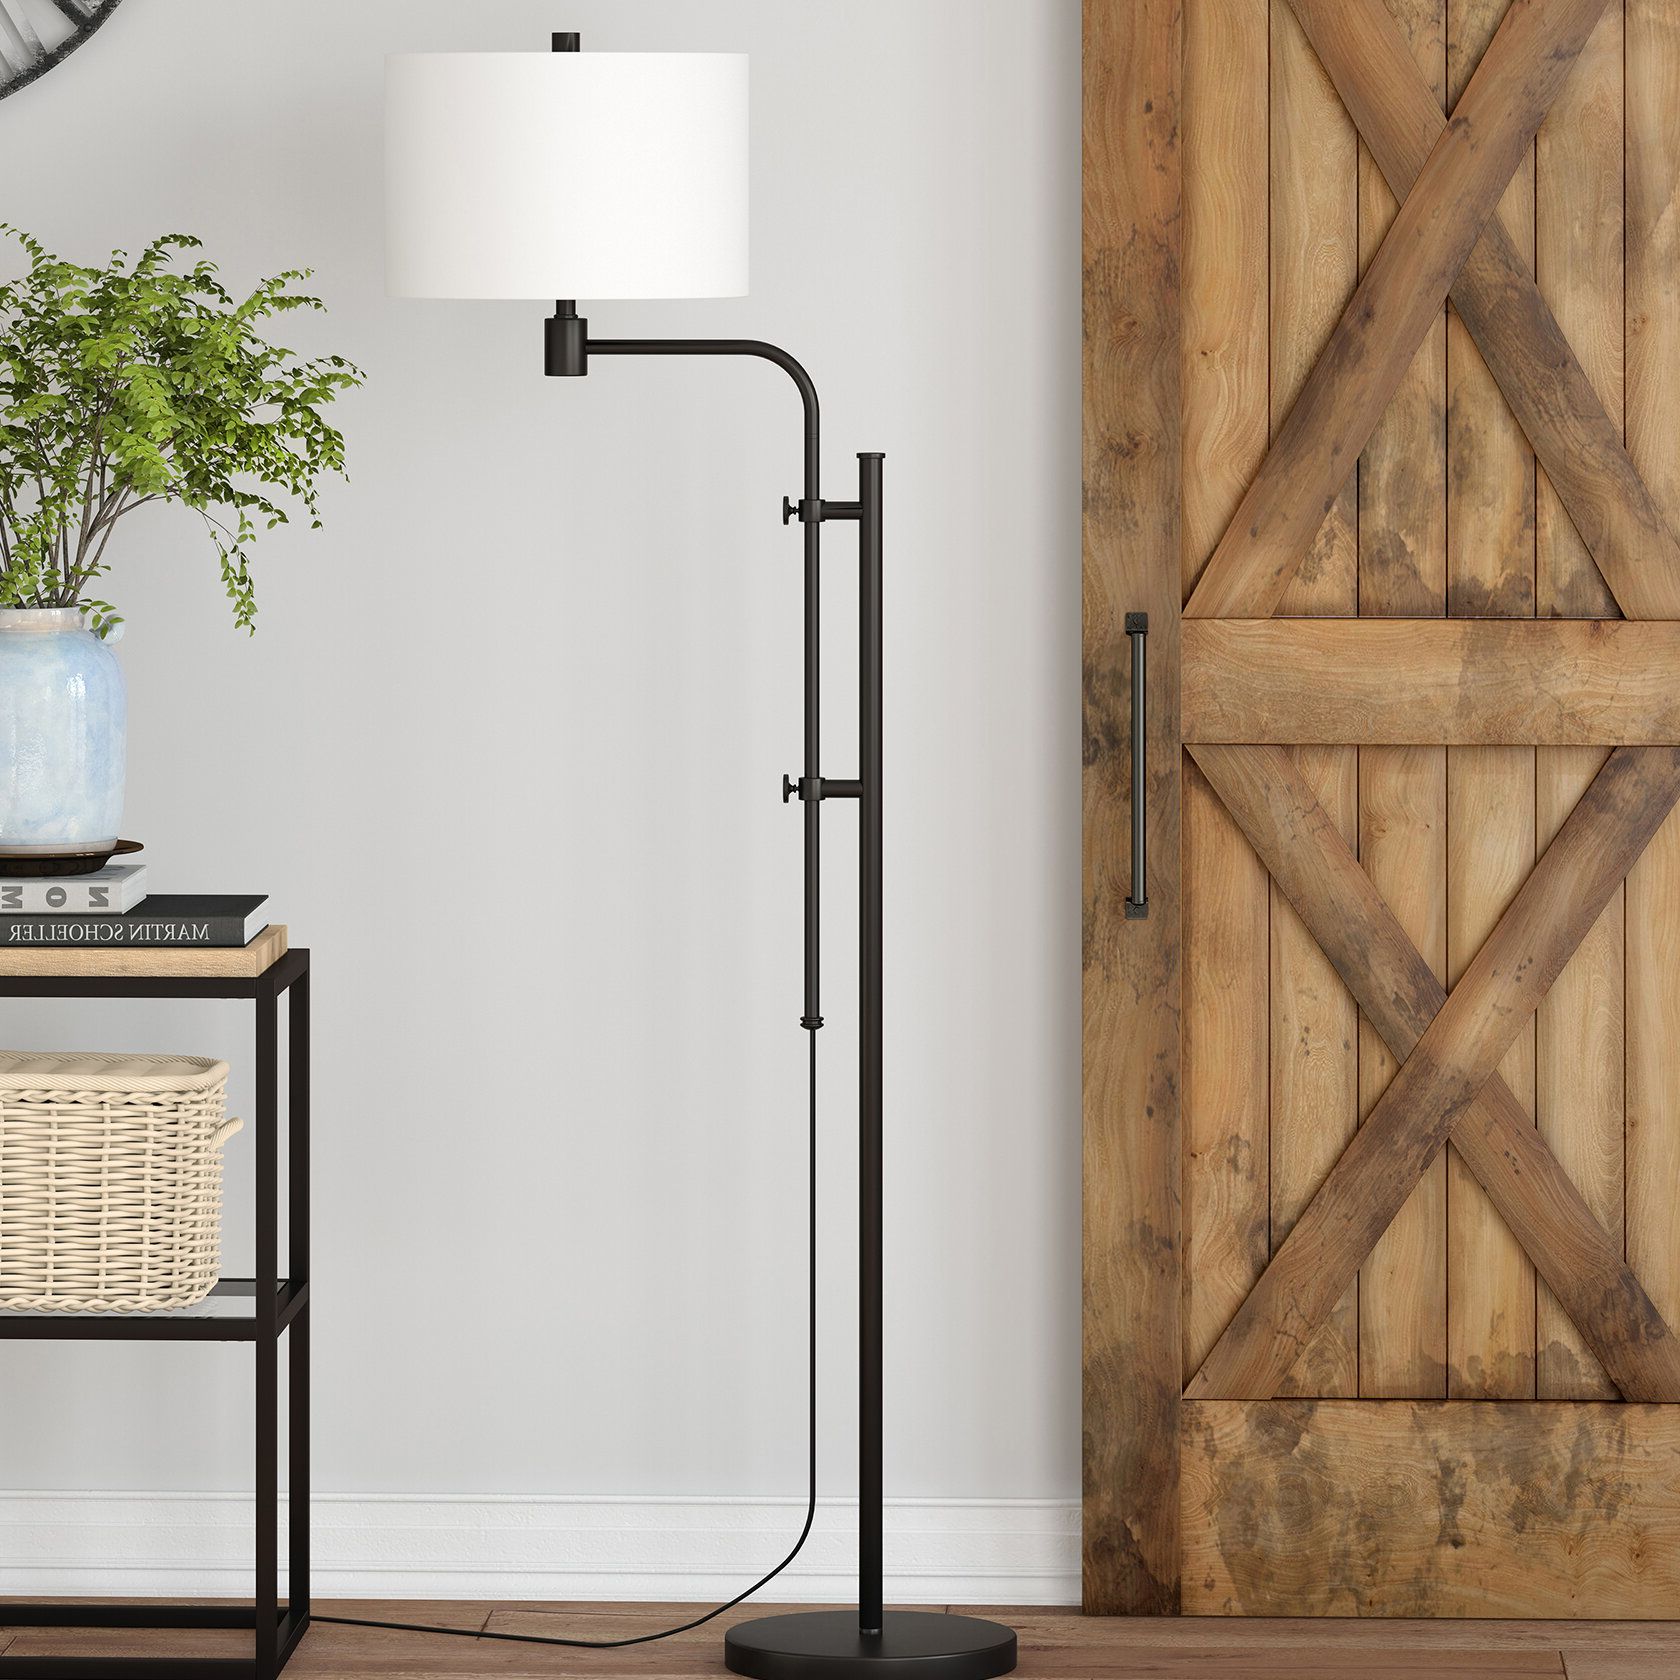 Adjustable Height Floor Lamps For Well Liked Wayfair (View 13 of 15)